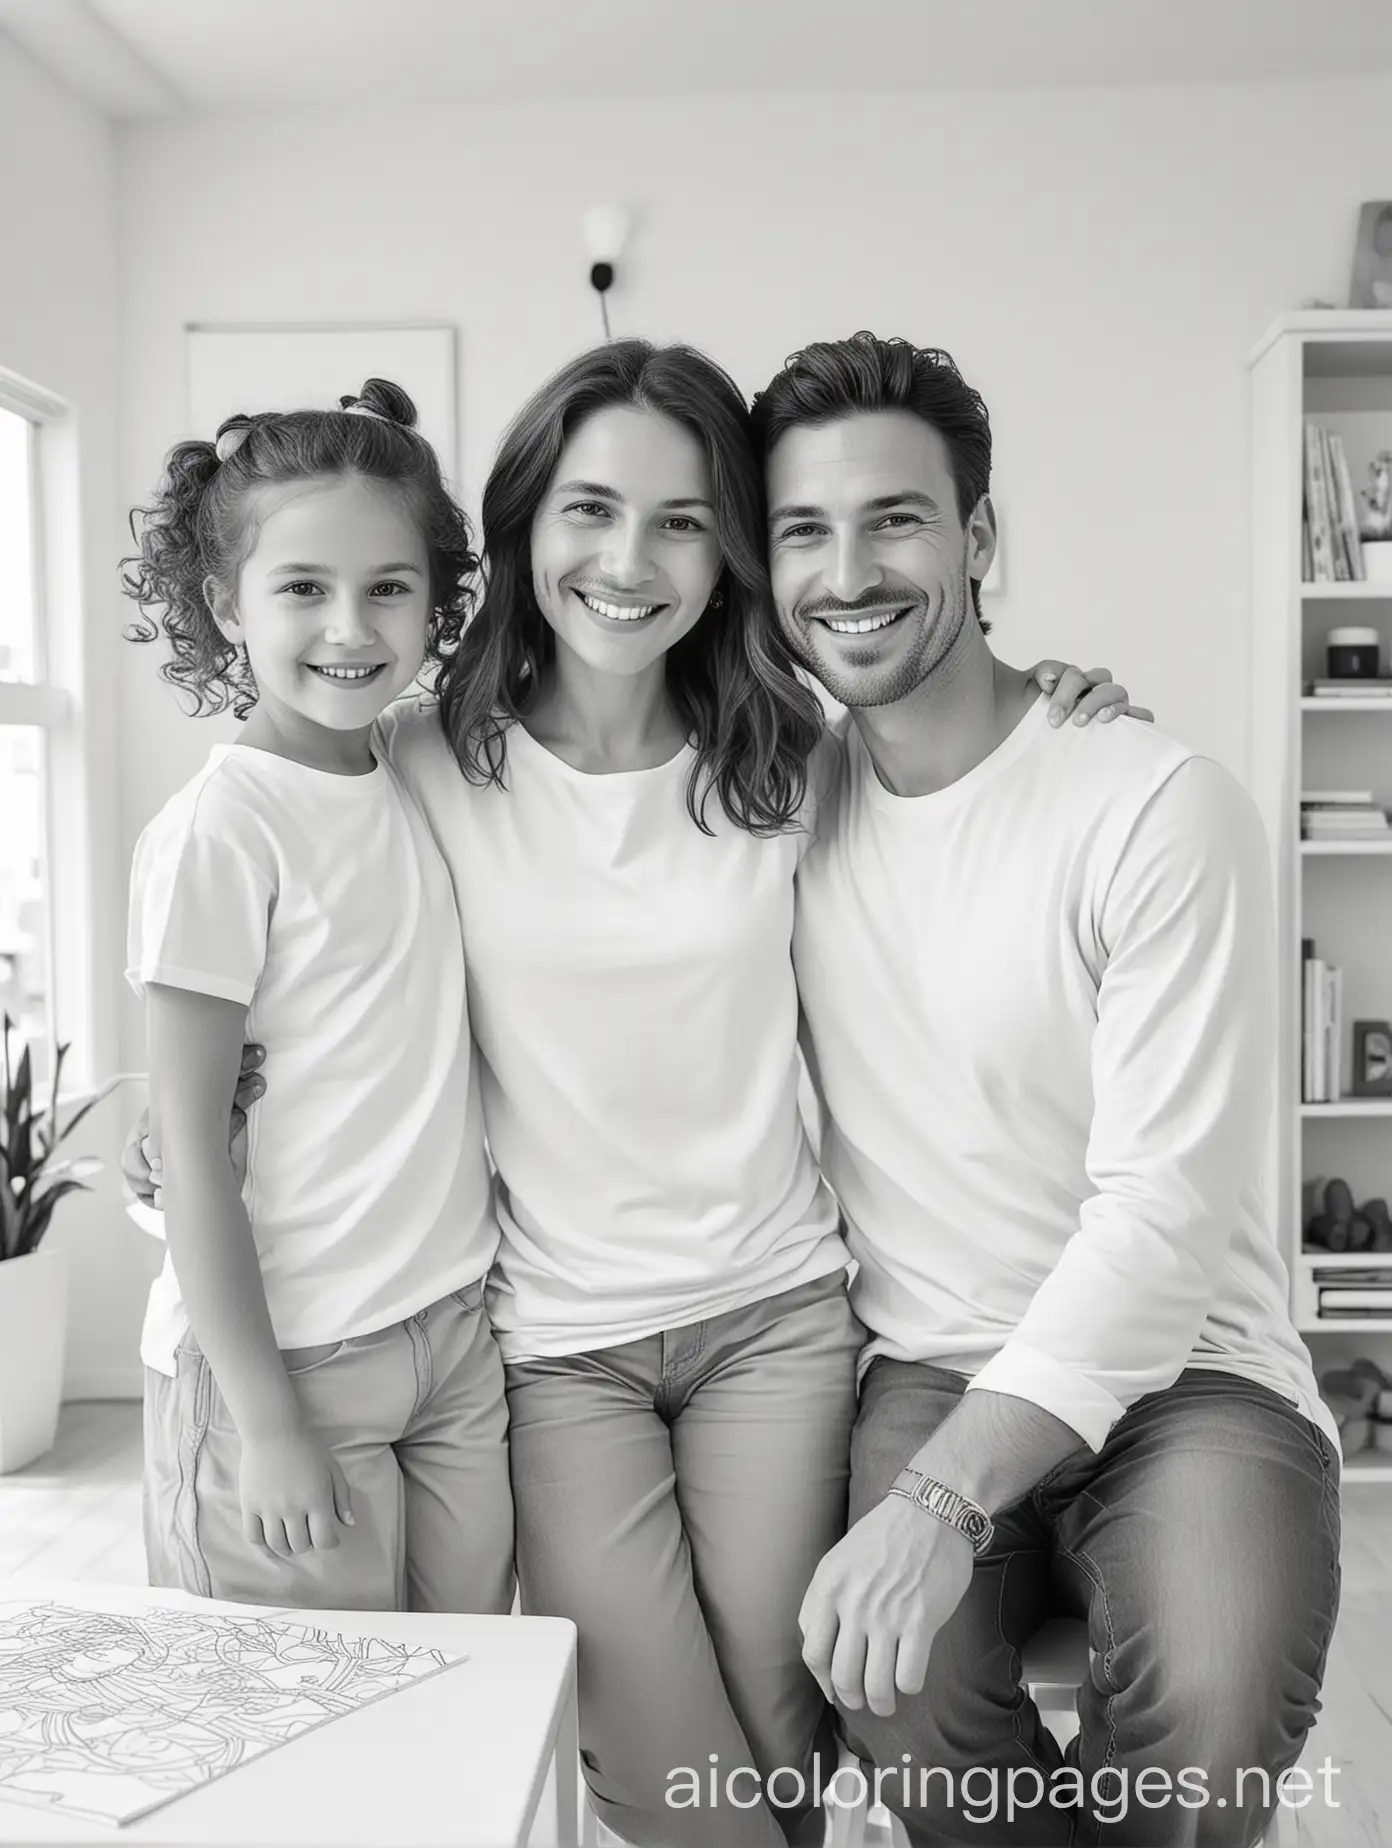 Young family at home smiling at camera

, Coloring Page, black and white, line art, white background, Simplicity, Ample White Space. The background of the coloring page is plain white to make it easy for young children to color within the lines. The outlines of all the subjects are easy to distinguish, making it simple for kids to color without too much difficulty